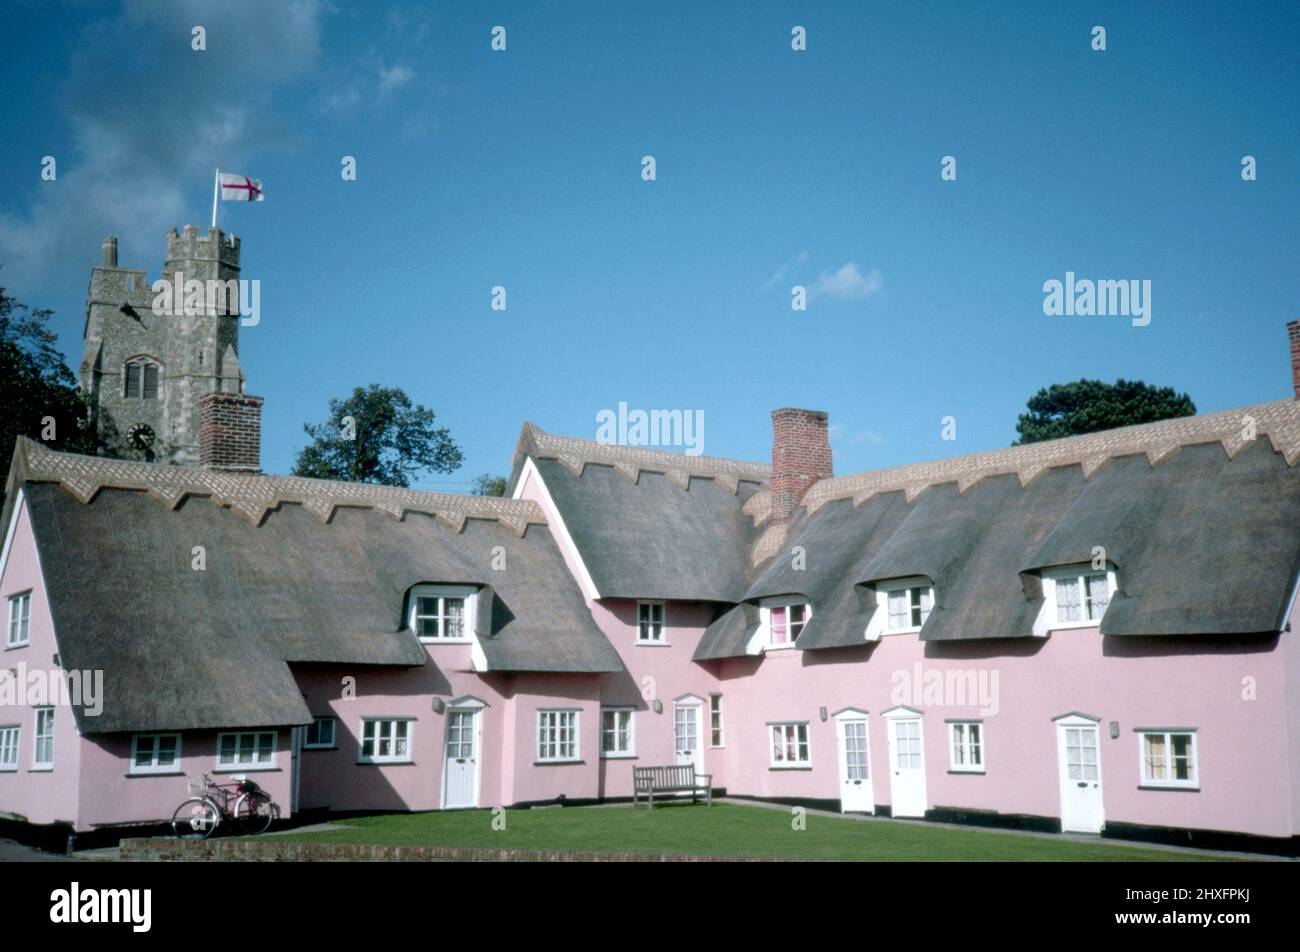 Picturesque view of pink thatched cottages and church village of Cavendish, Suffolk, England, UK with bright blue sky and copy space. Stock Photo